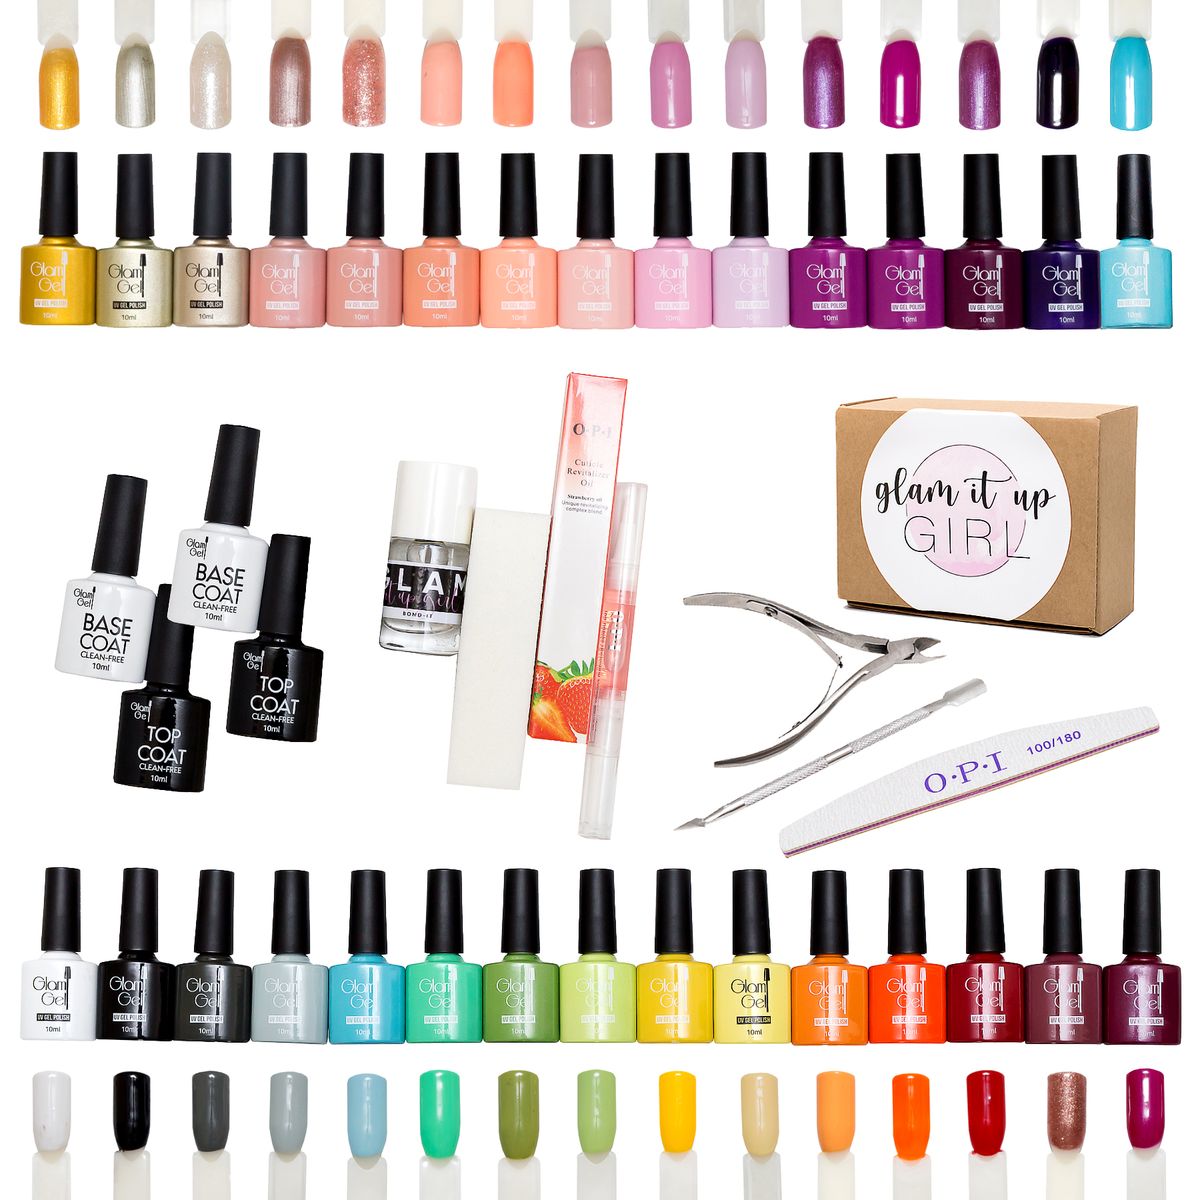 High-Quality UV/LED Glam Gel Nail Polish Salon Starter Kit - 40 Pieces |  Buy Online in South Africa 